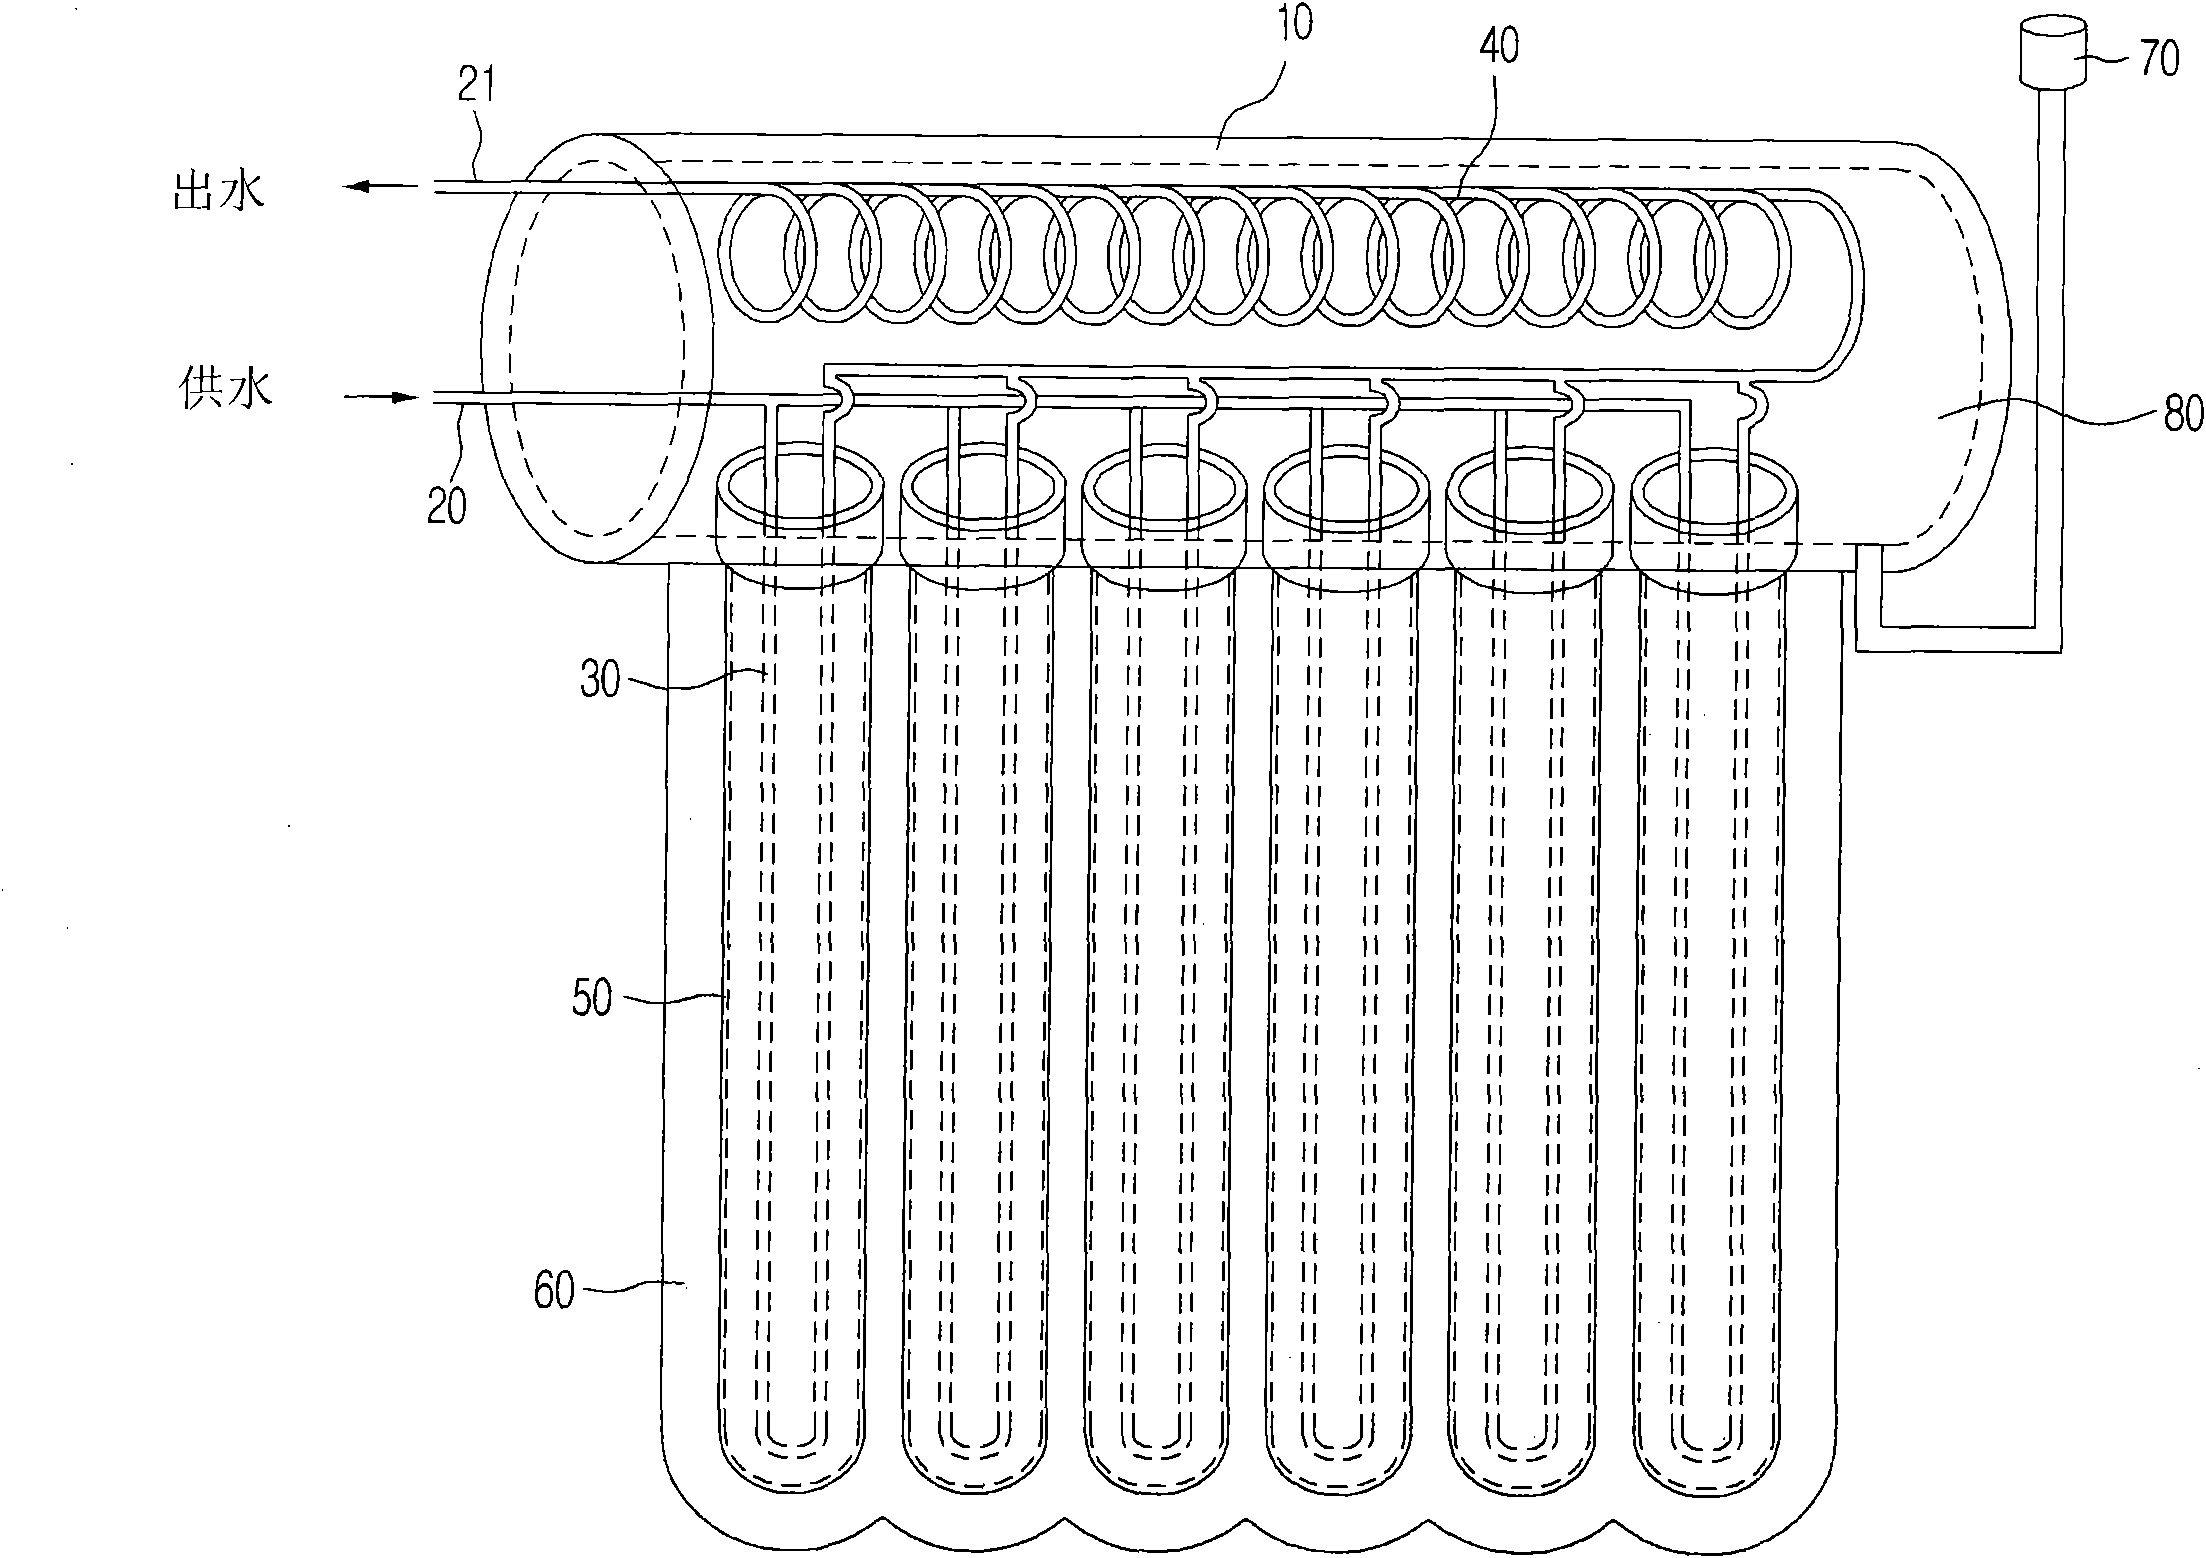 A water heating apparatus unified with solar heat collector using vaccum pipe